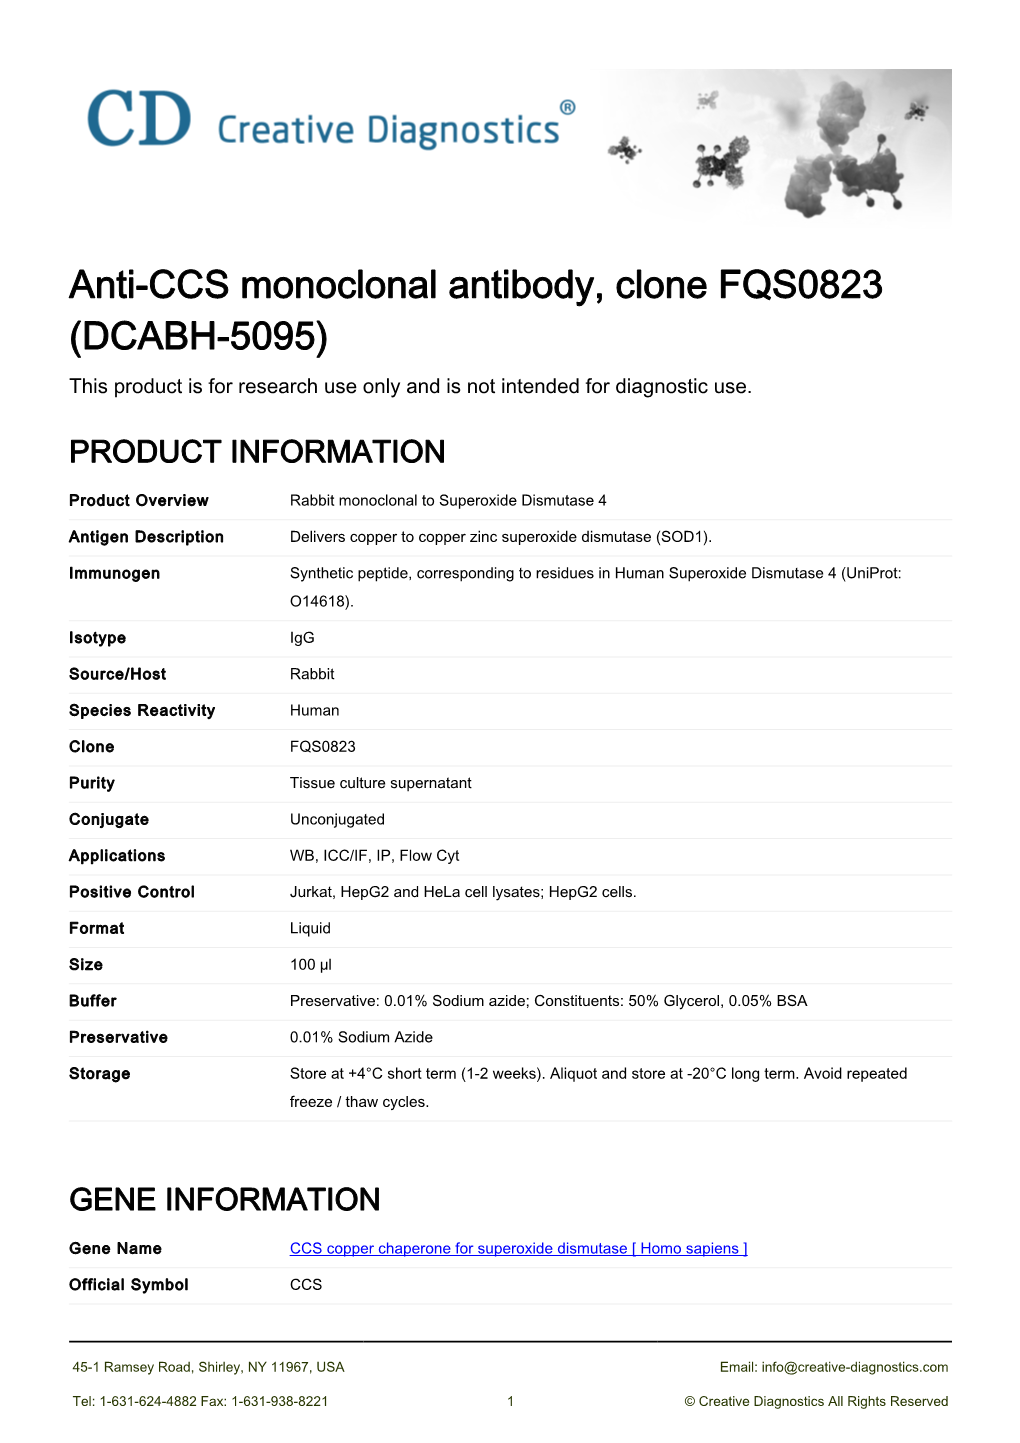 Anti-CCS Monoclonal Antibody, Clone FQS0823 (DCABH-5095) This Product Is for Research Use Only and Is Not Intended for Diagnostic Use